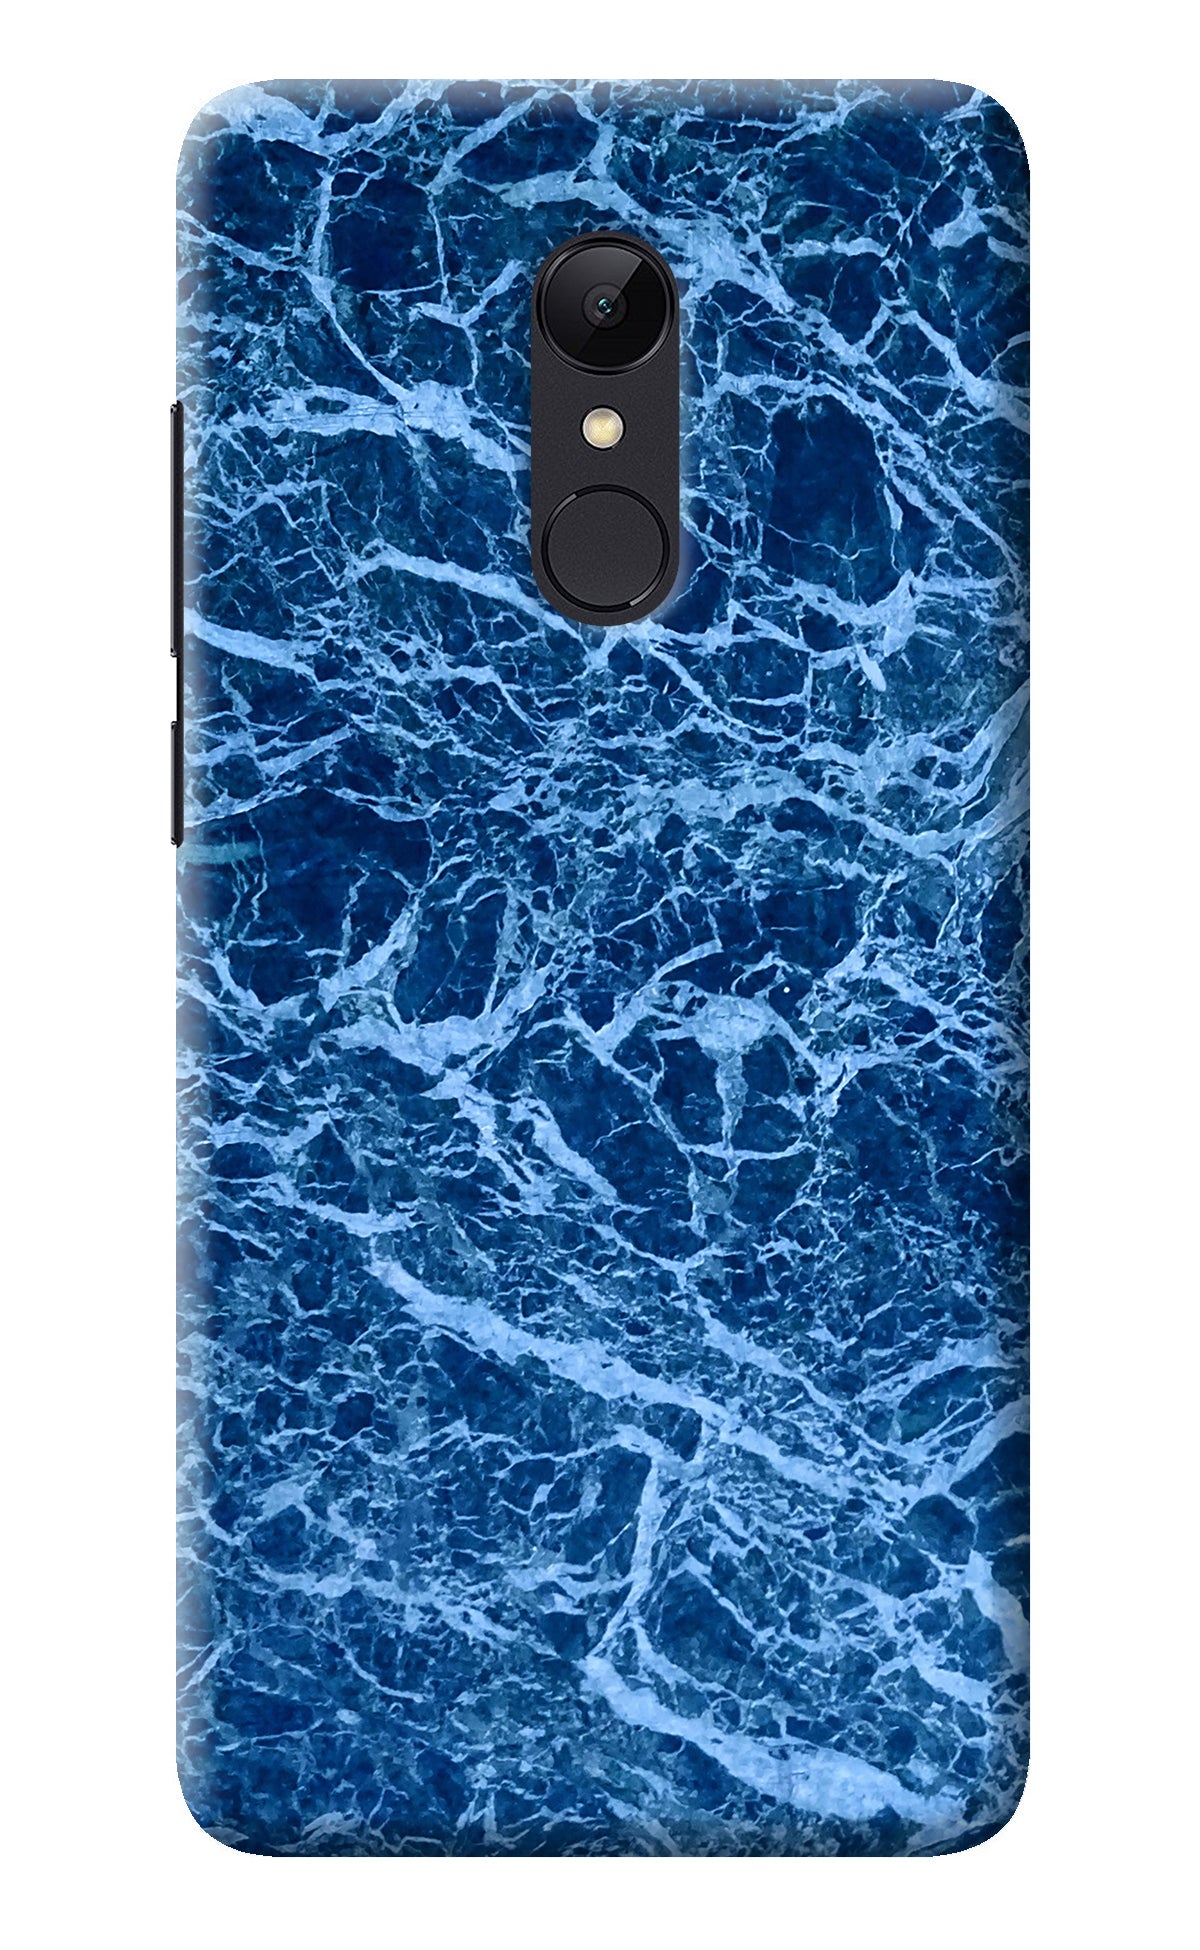 Blue Marble Redmi Note 4 Back Cover